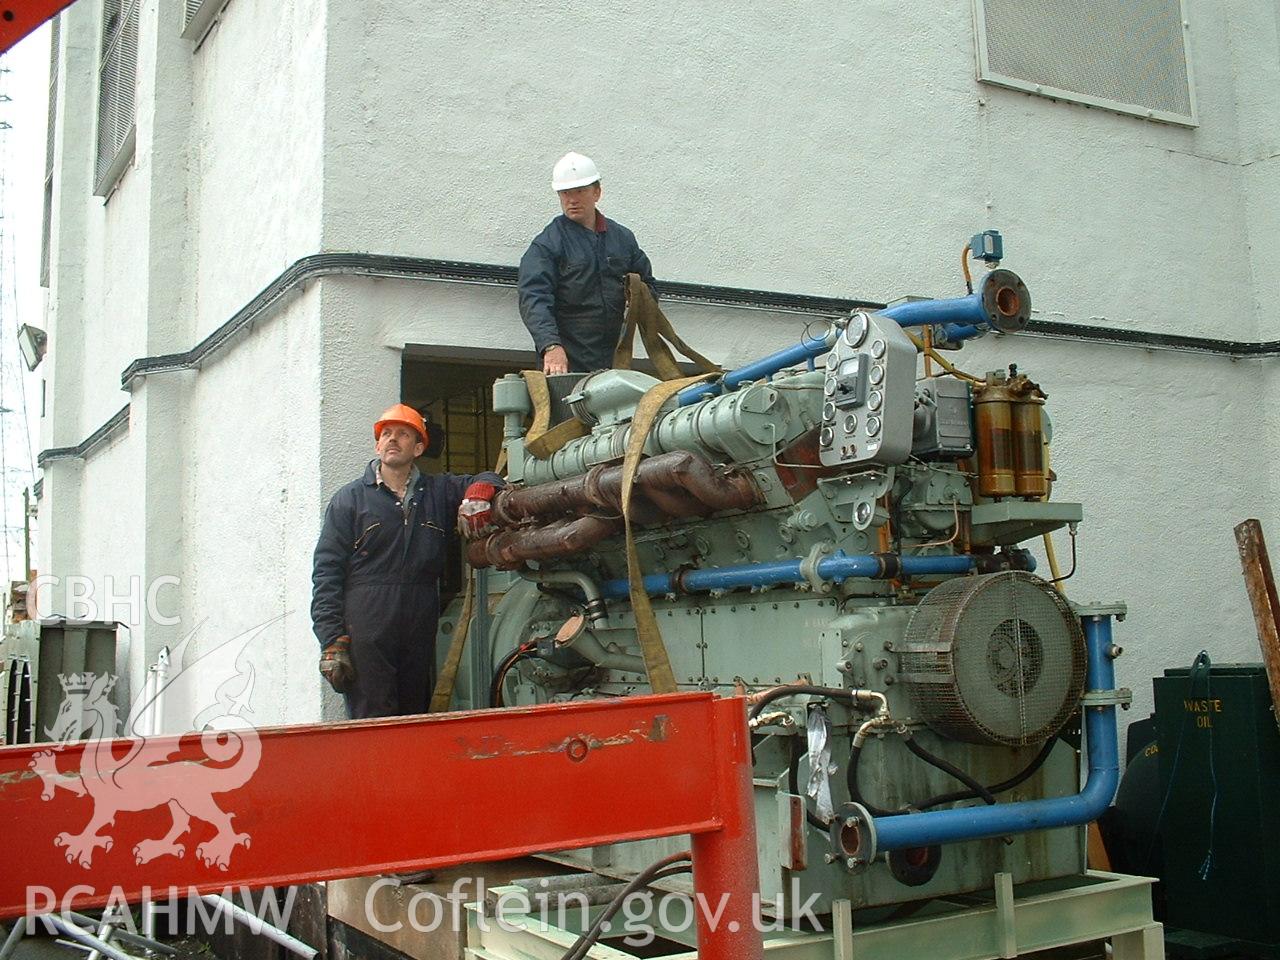 Colour digital photograph showing an engine being moved onto a truck.